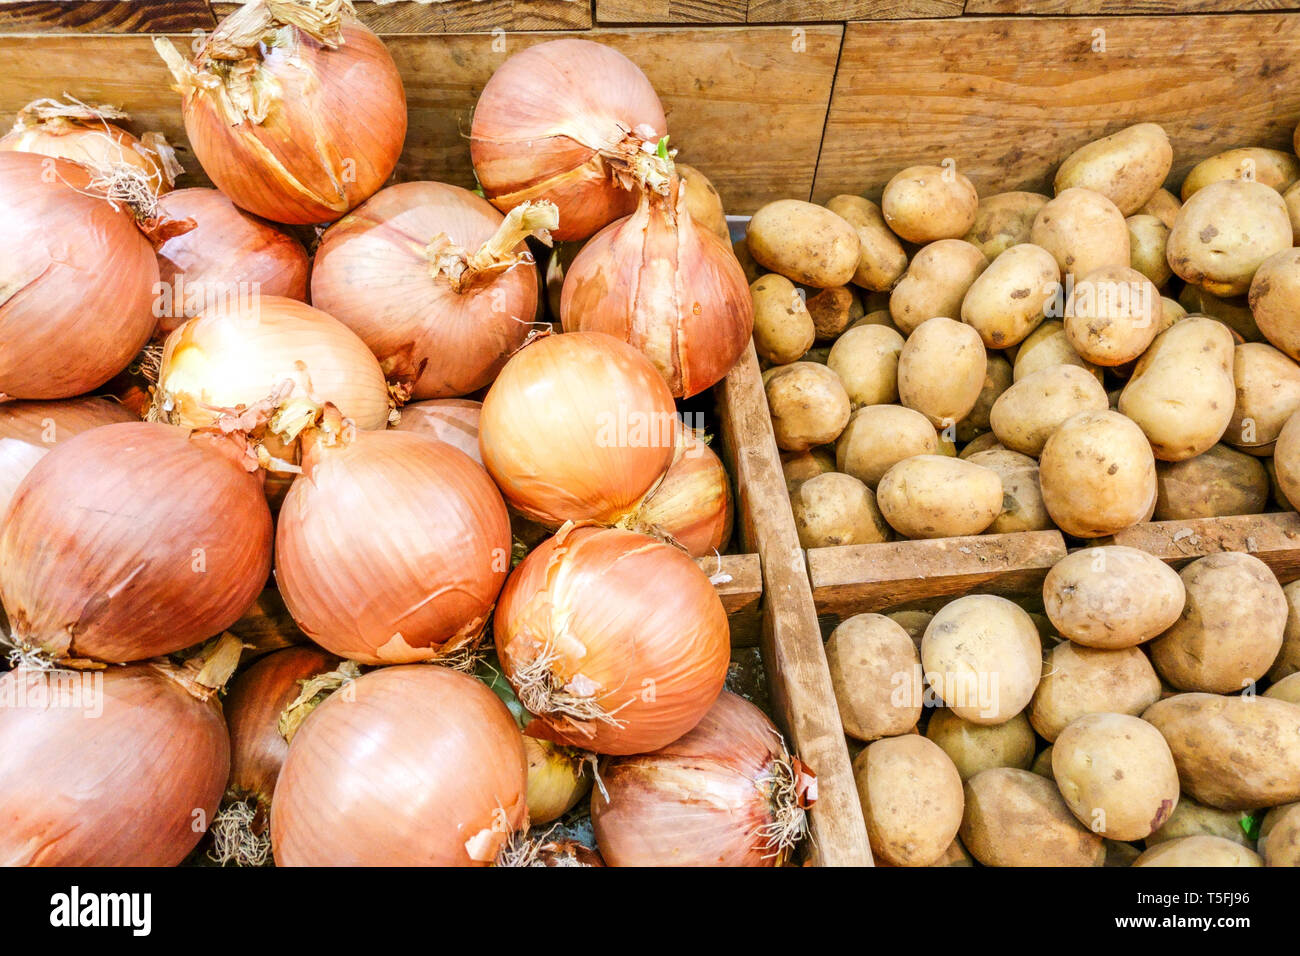 Onions potatoes in a wooden box on the market in Spain Stock Photo